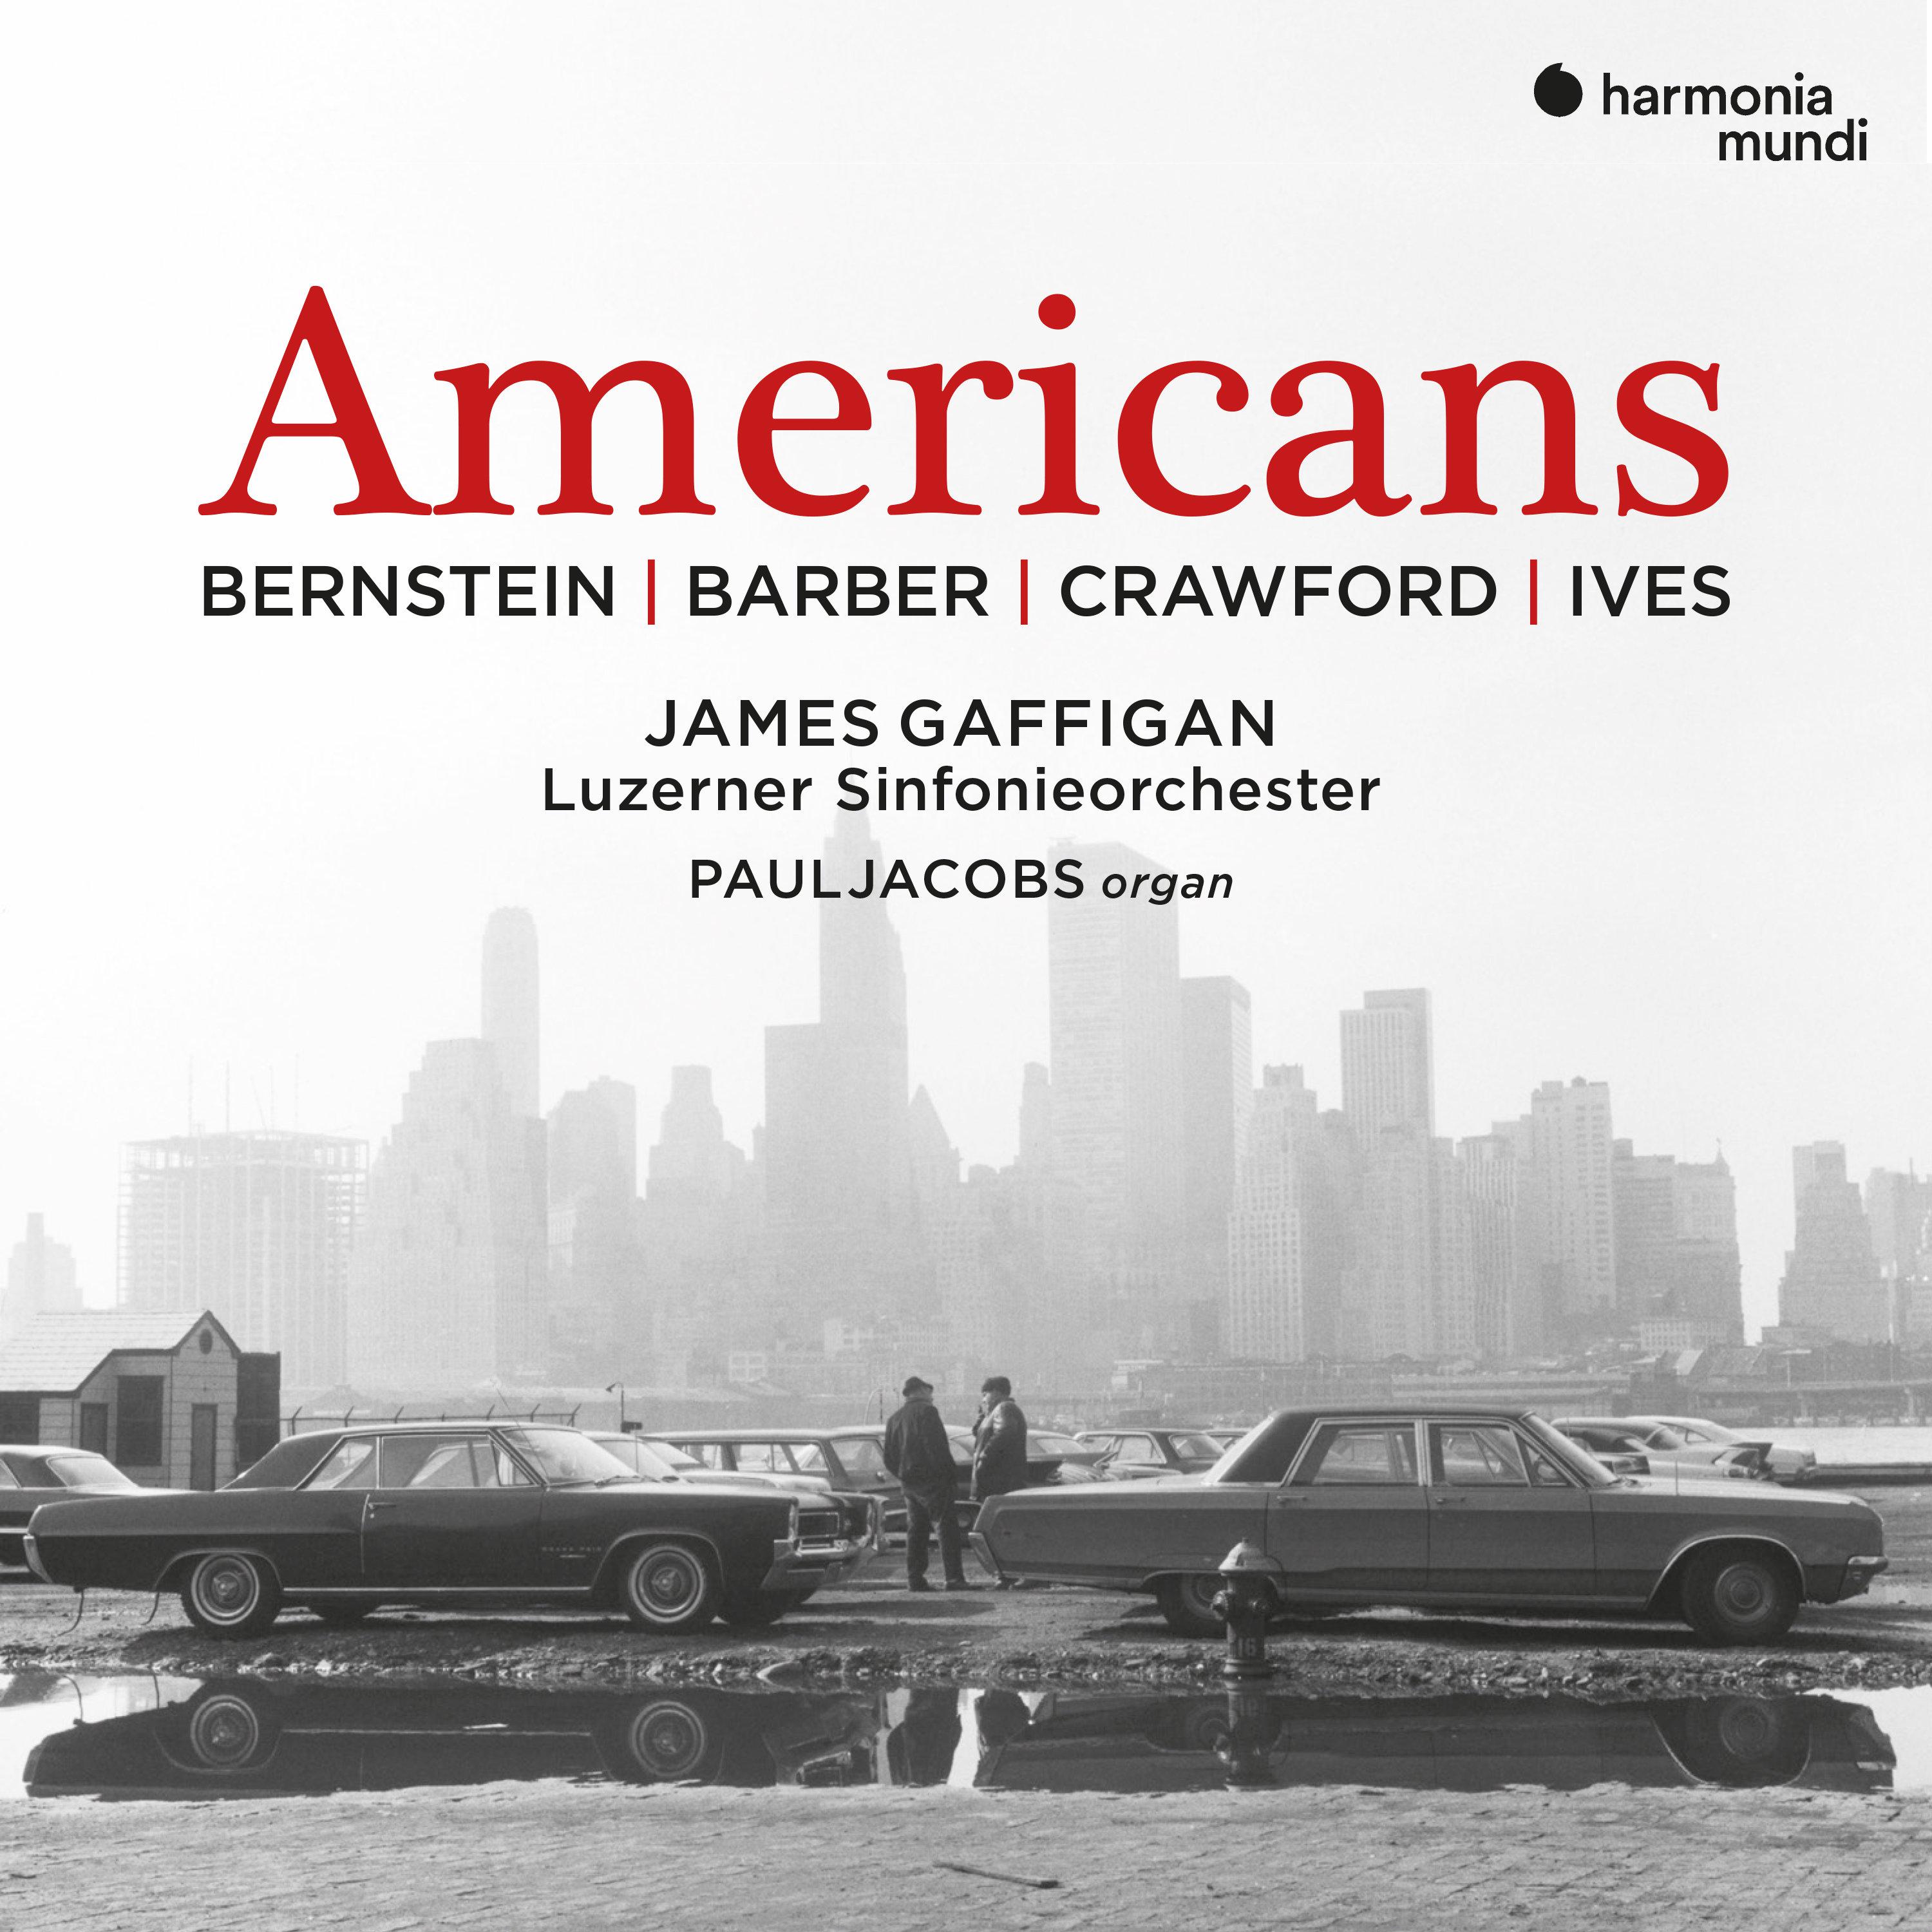 James Gaffigan - Symphonic Dances from 'West Side Story': 5. Cha-cha. Andantino con grazia